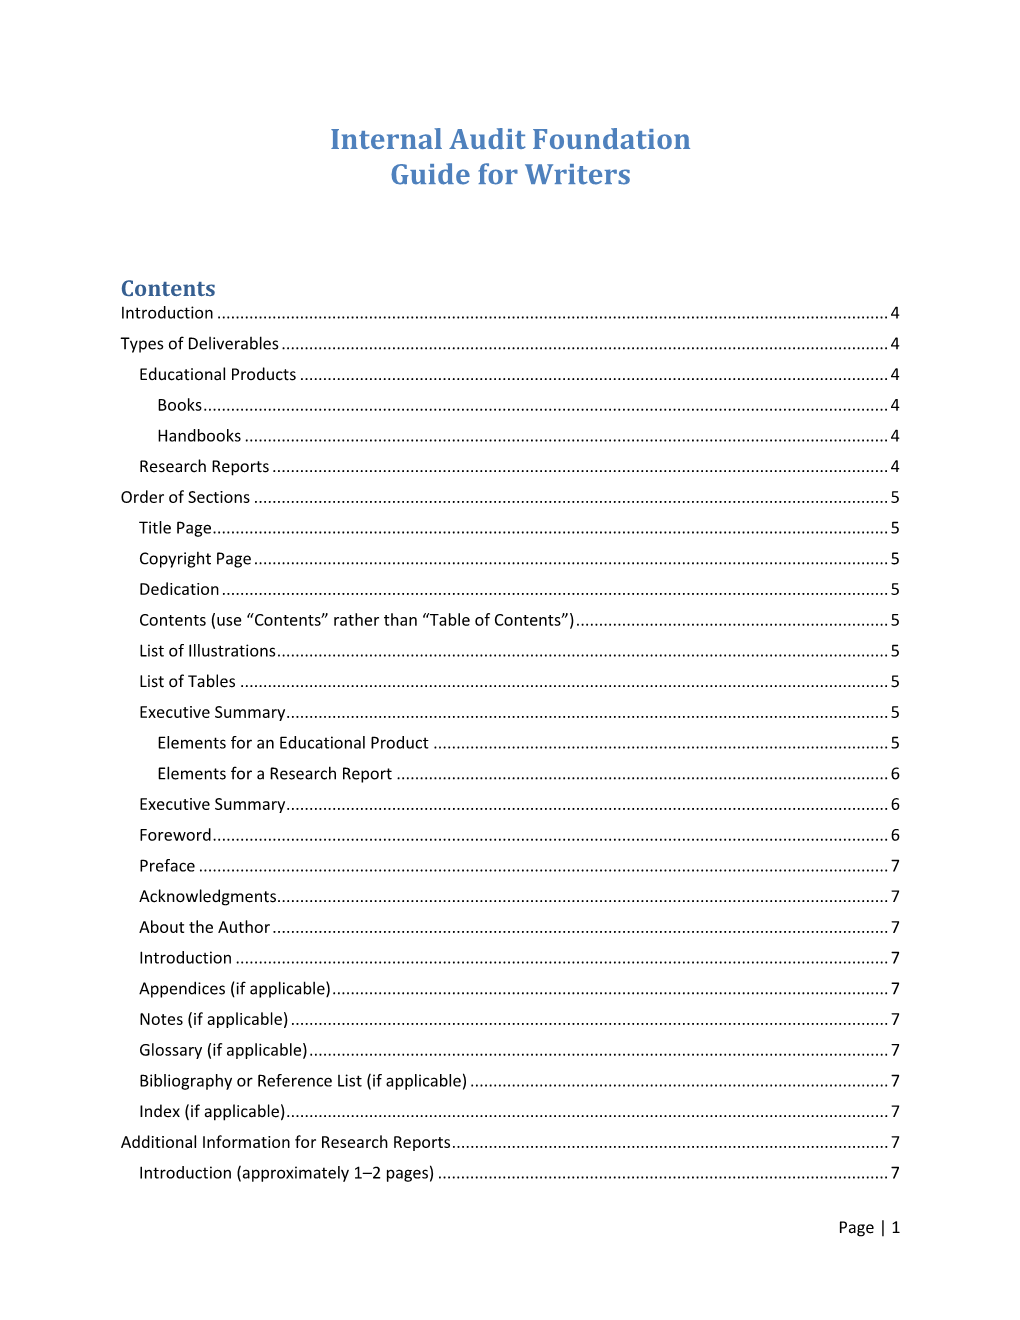 Internal Audit Foundation Guide for Writers